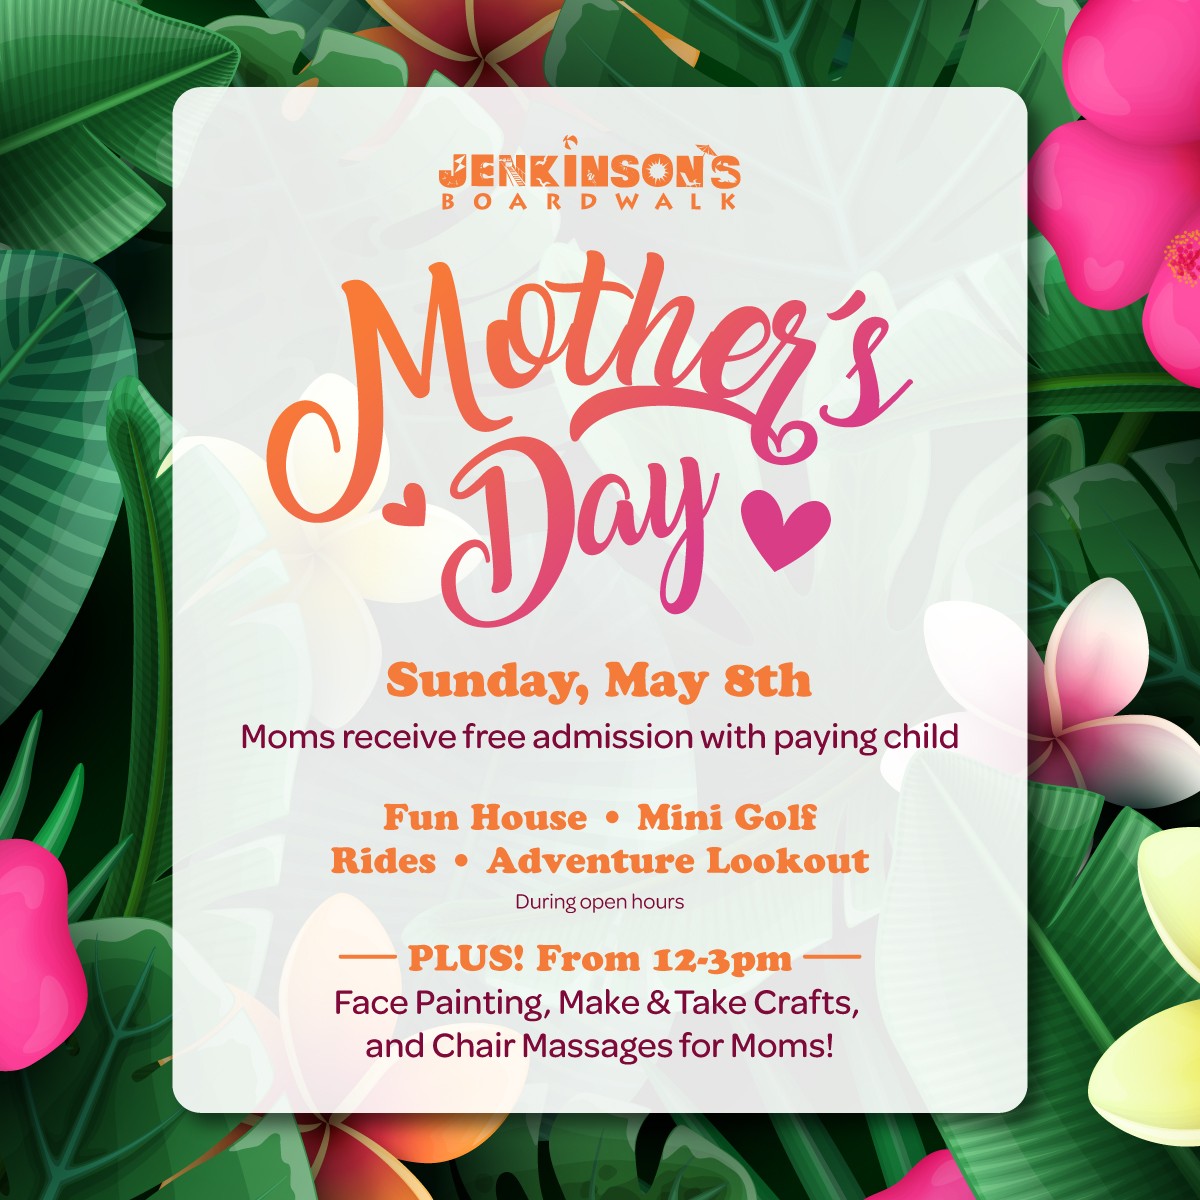 mother's day at jenkinson's boardwalk